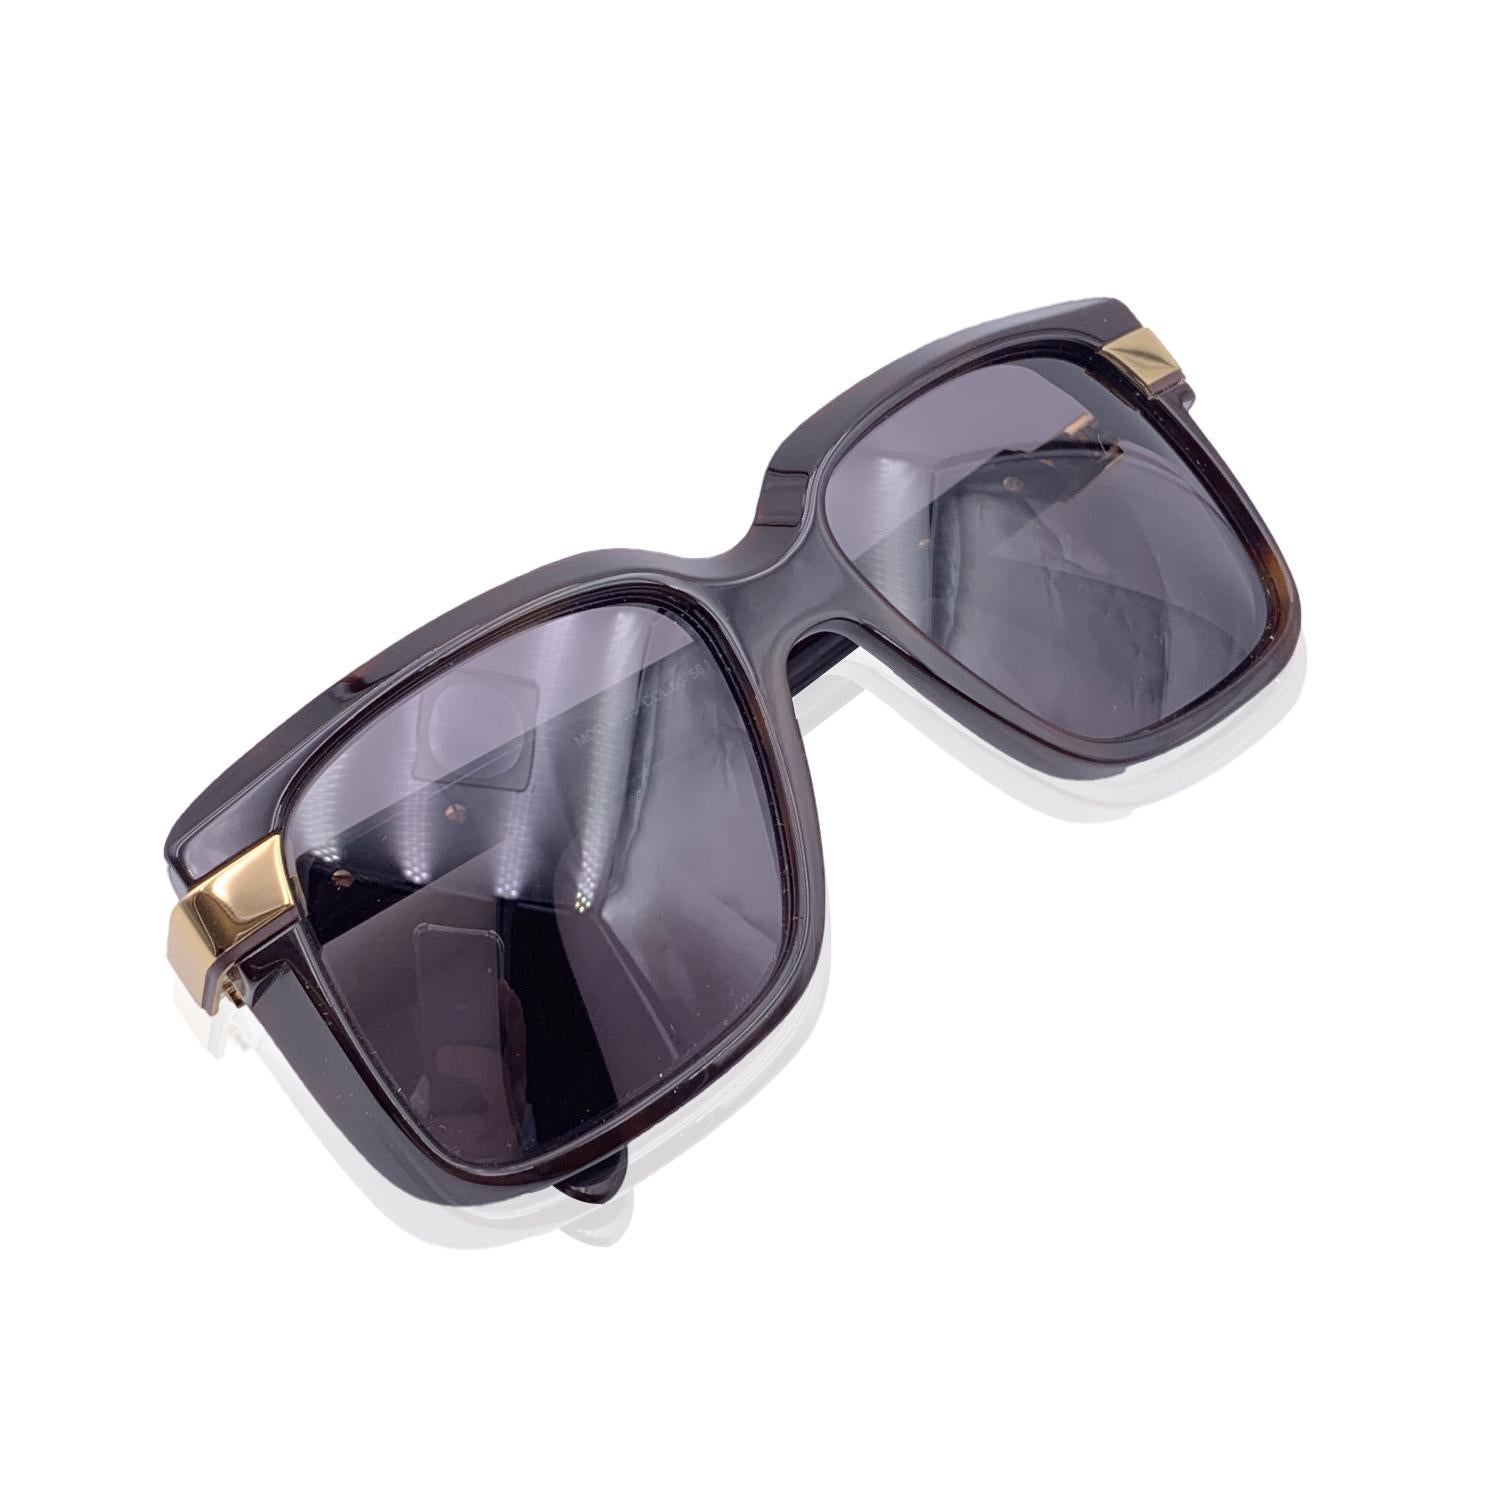 Beautiful sunglasses by Cazal, mod. 680/3 Col. 80. Dark brown acetate frame with gold metal accents on temples. Cazal logo on temples. Grey 100% UV protection lenses. Made in Germany.

Details

MATERIAL: Acetate

COLOR: Brown

MODEL: Mod. 680/3 Col.